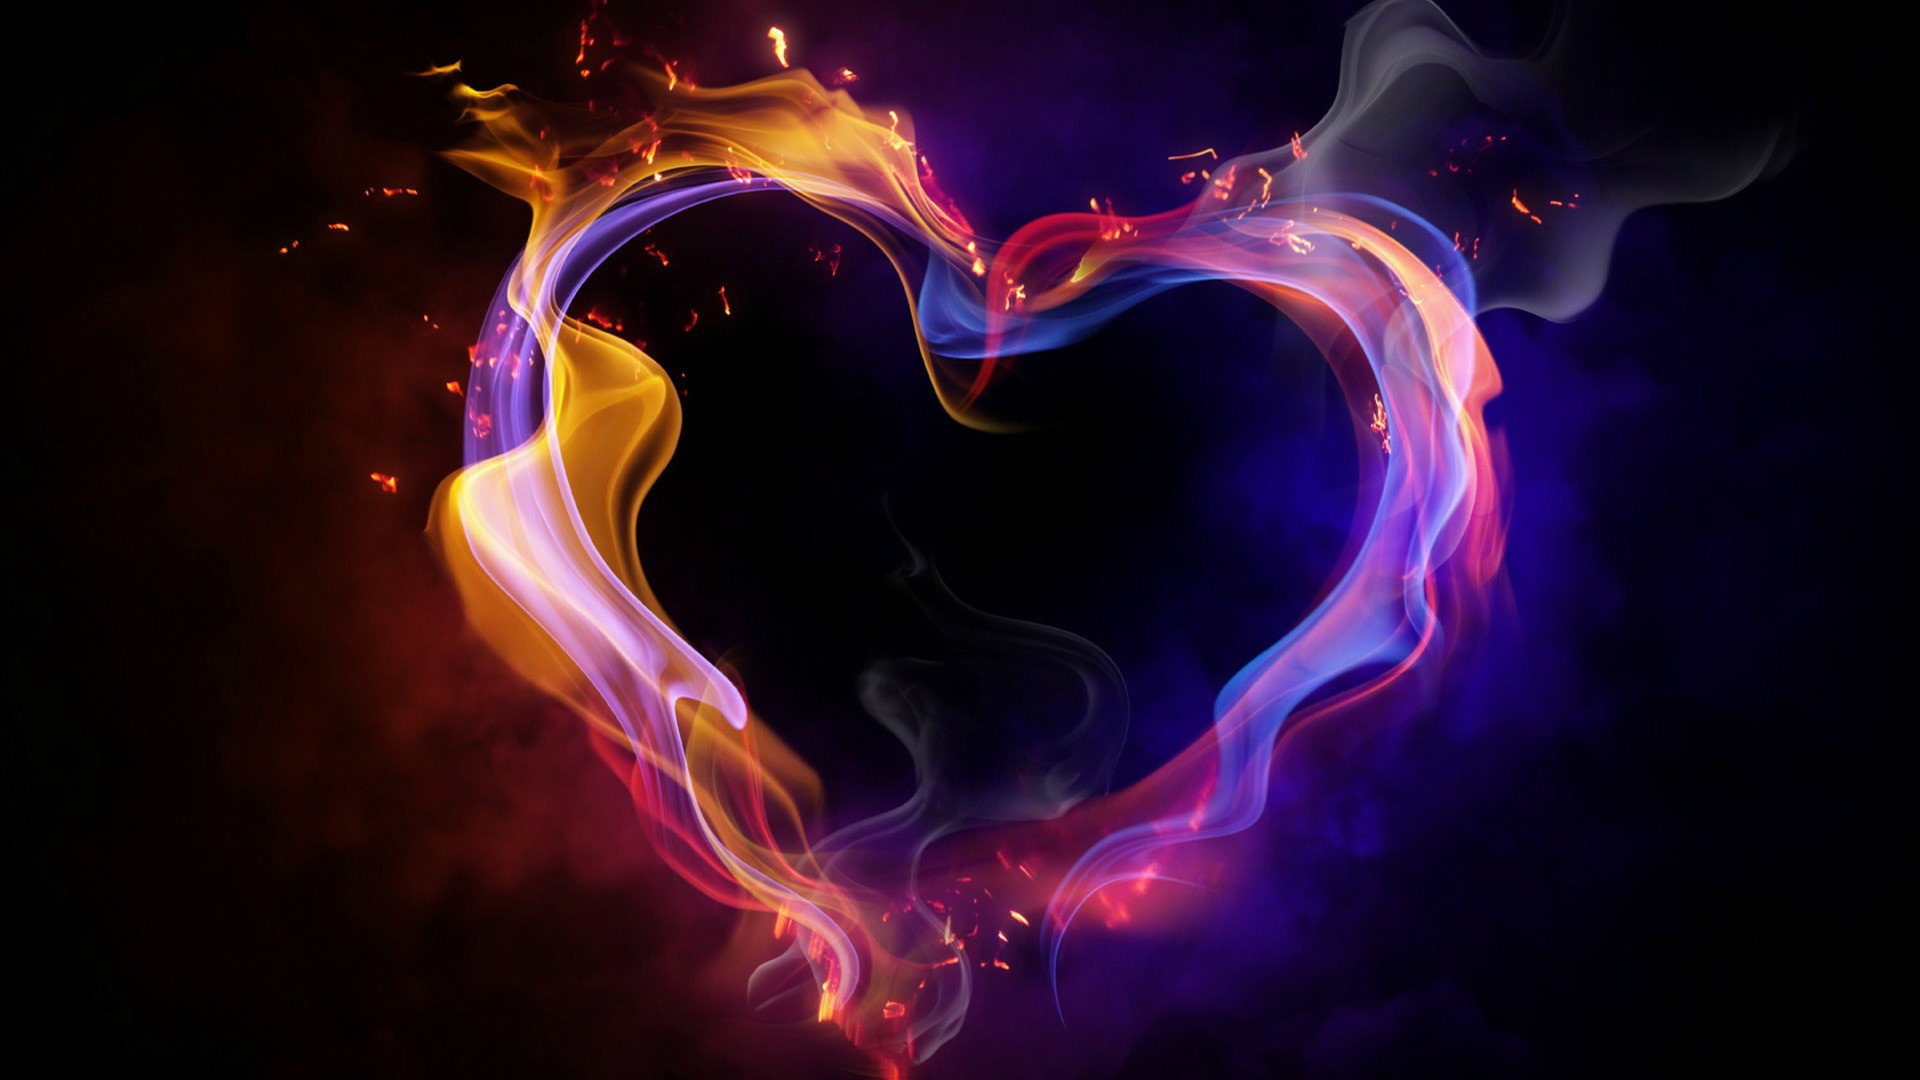 Cool Color Abstract Heart Wallpaper For Desktop